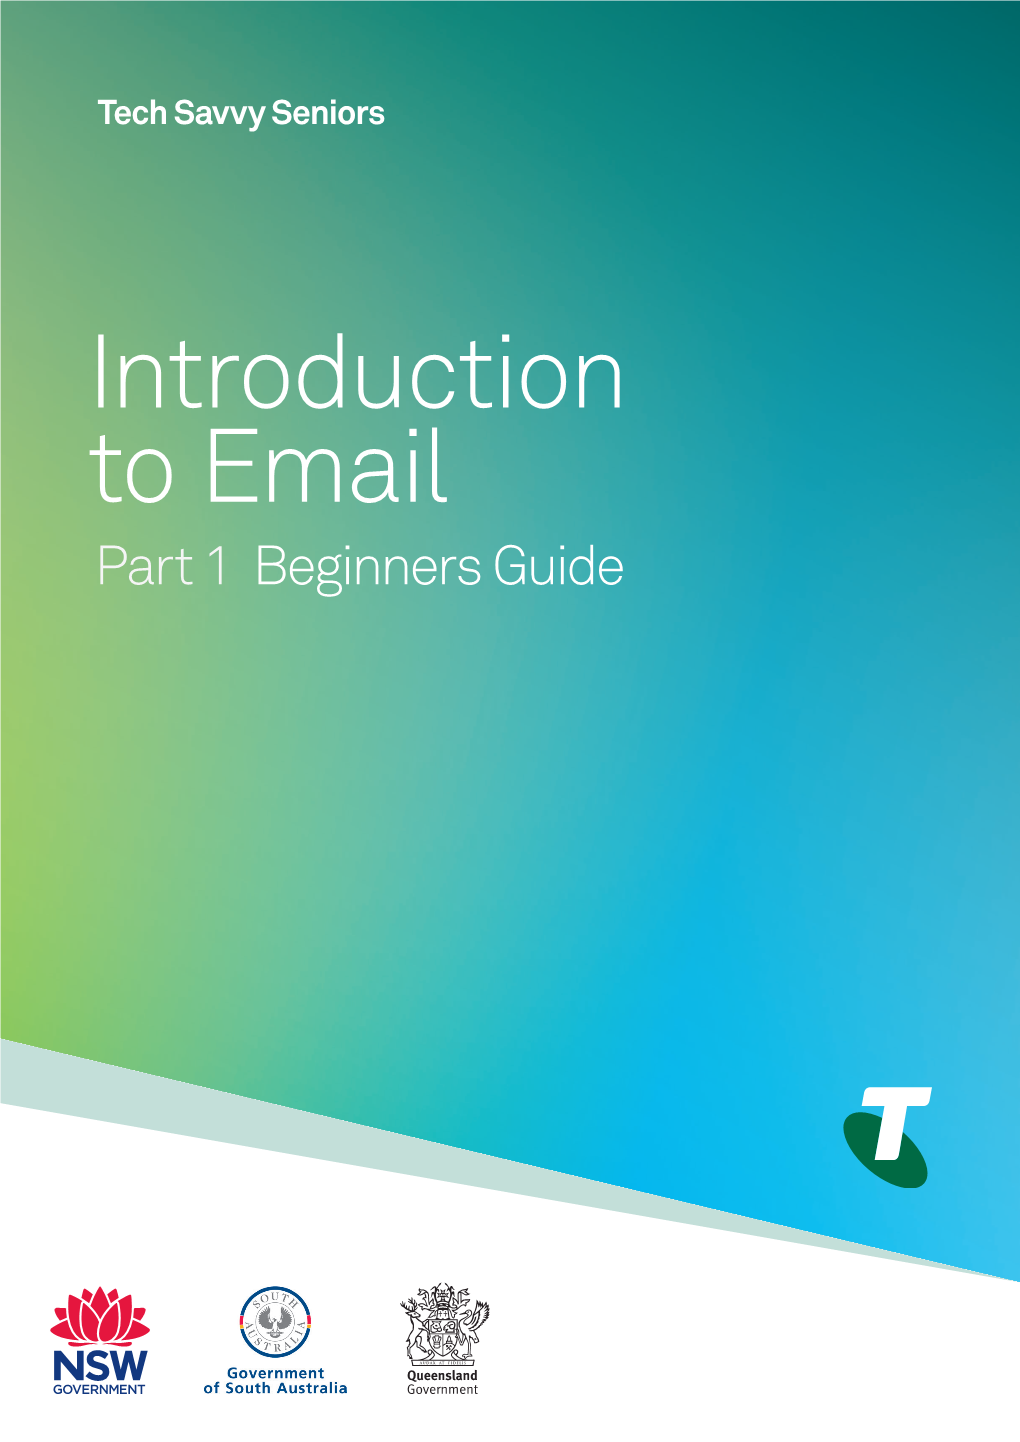 Introduction to Email Part 1 Beginners Guide TOPIC INTRODUCTION to EMAIL - PART 1